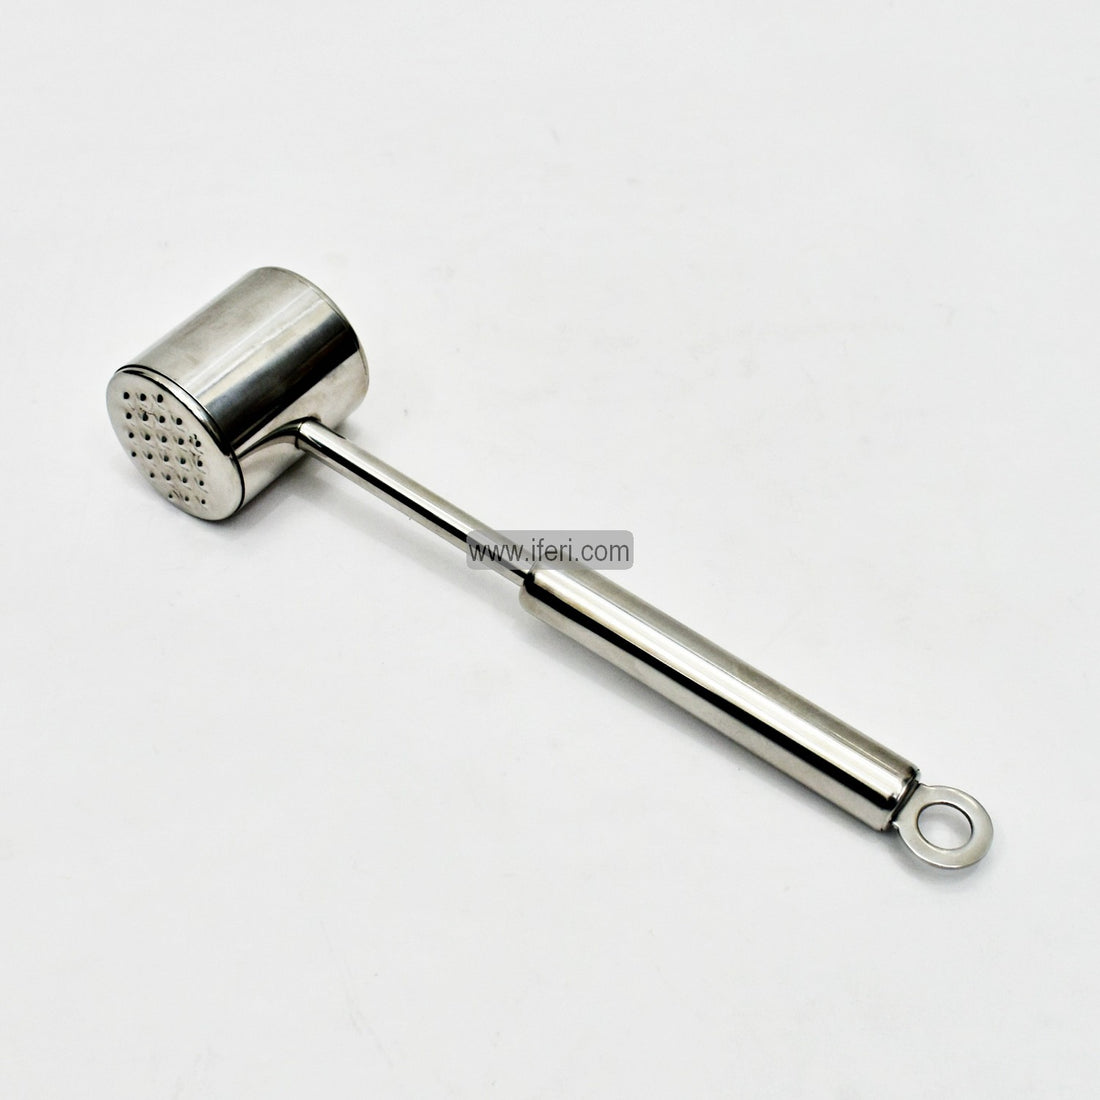 10.5 Inch Stainless Steel Meat Tenderizer Hammer EB1696